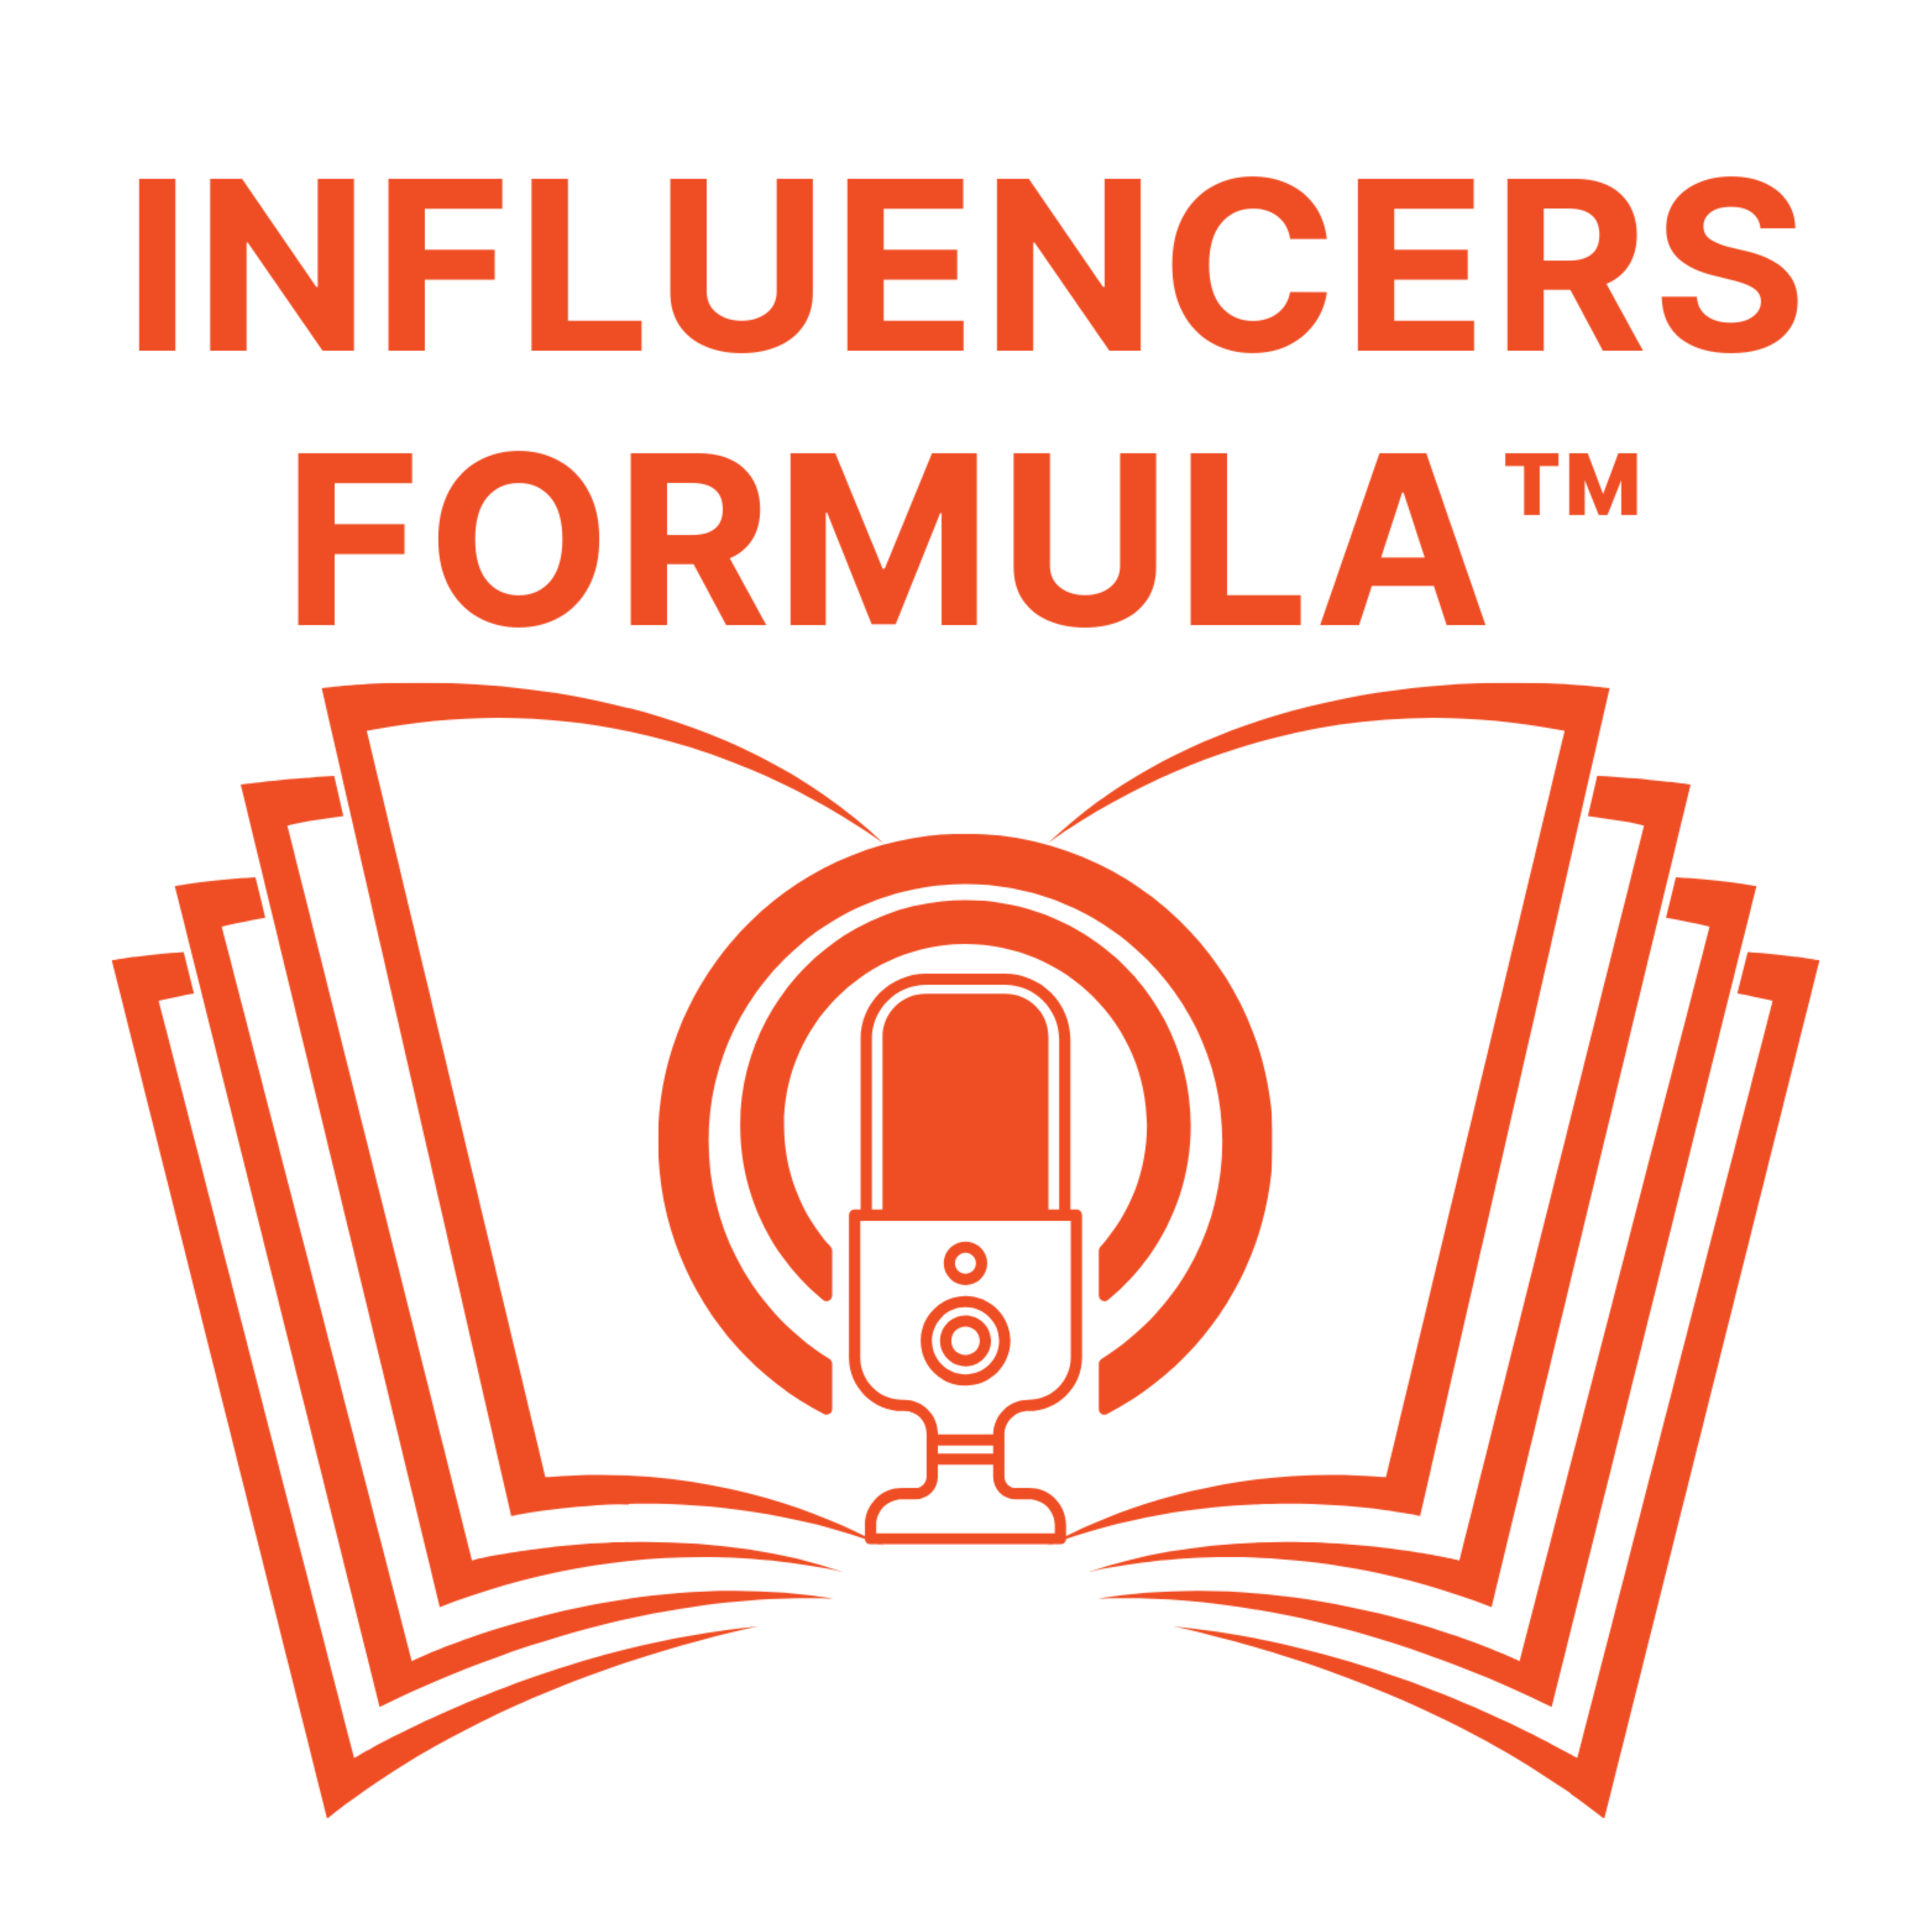 Welcome to the Influencers Formula Podcast Network!